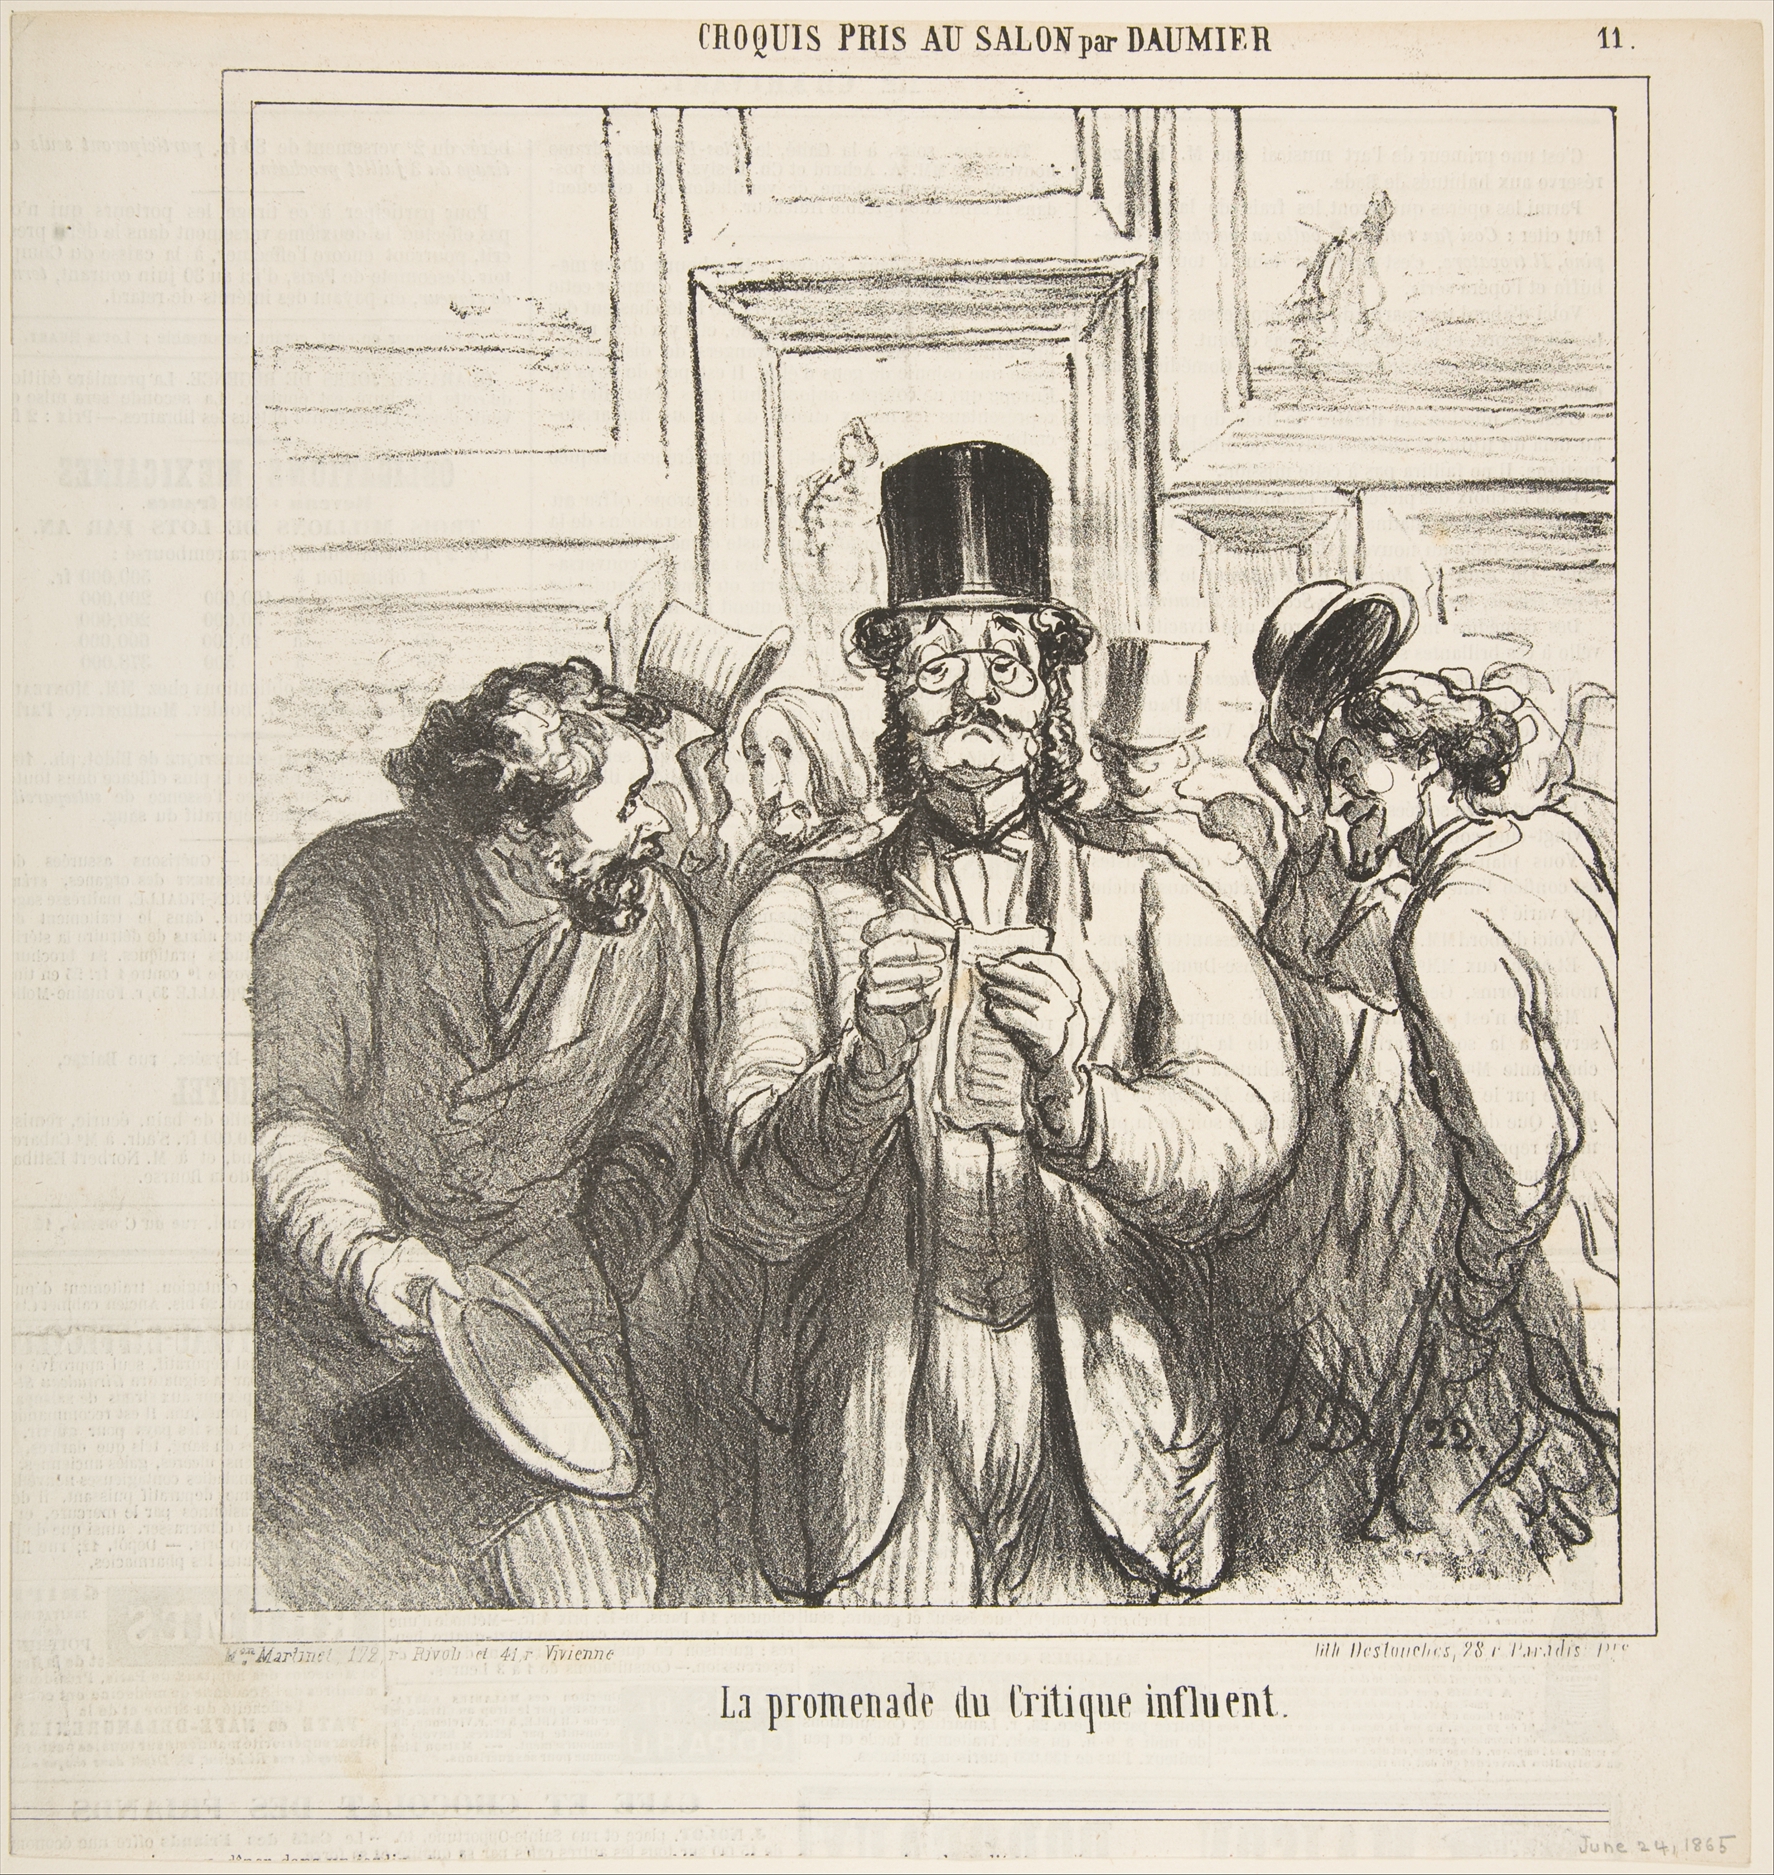 Honoré Daumier Walkthrough of an influential critic, from 'Sketches